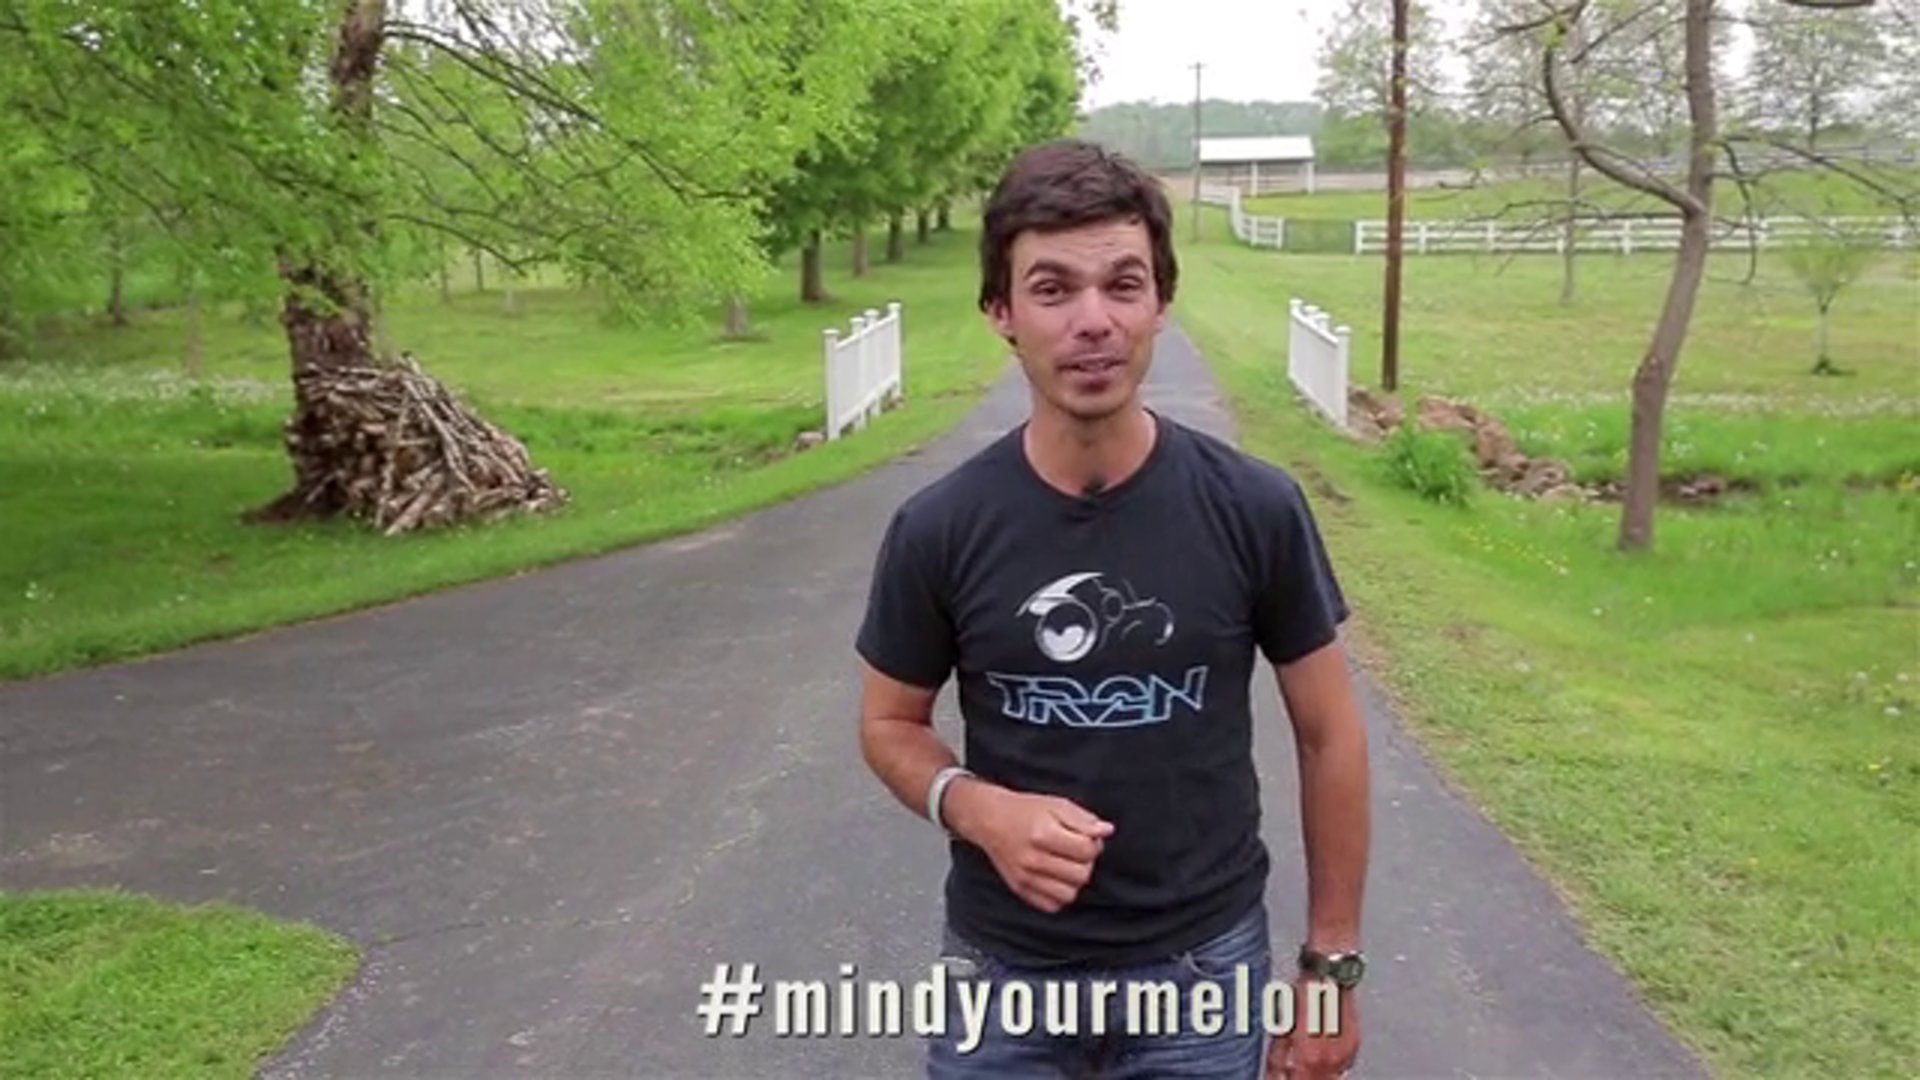 Wear Riding Helmets—It’s How To “Mind Your Melon”